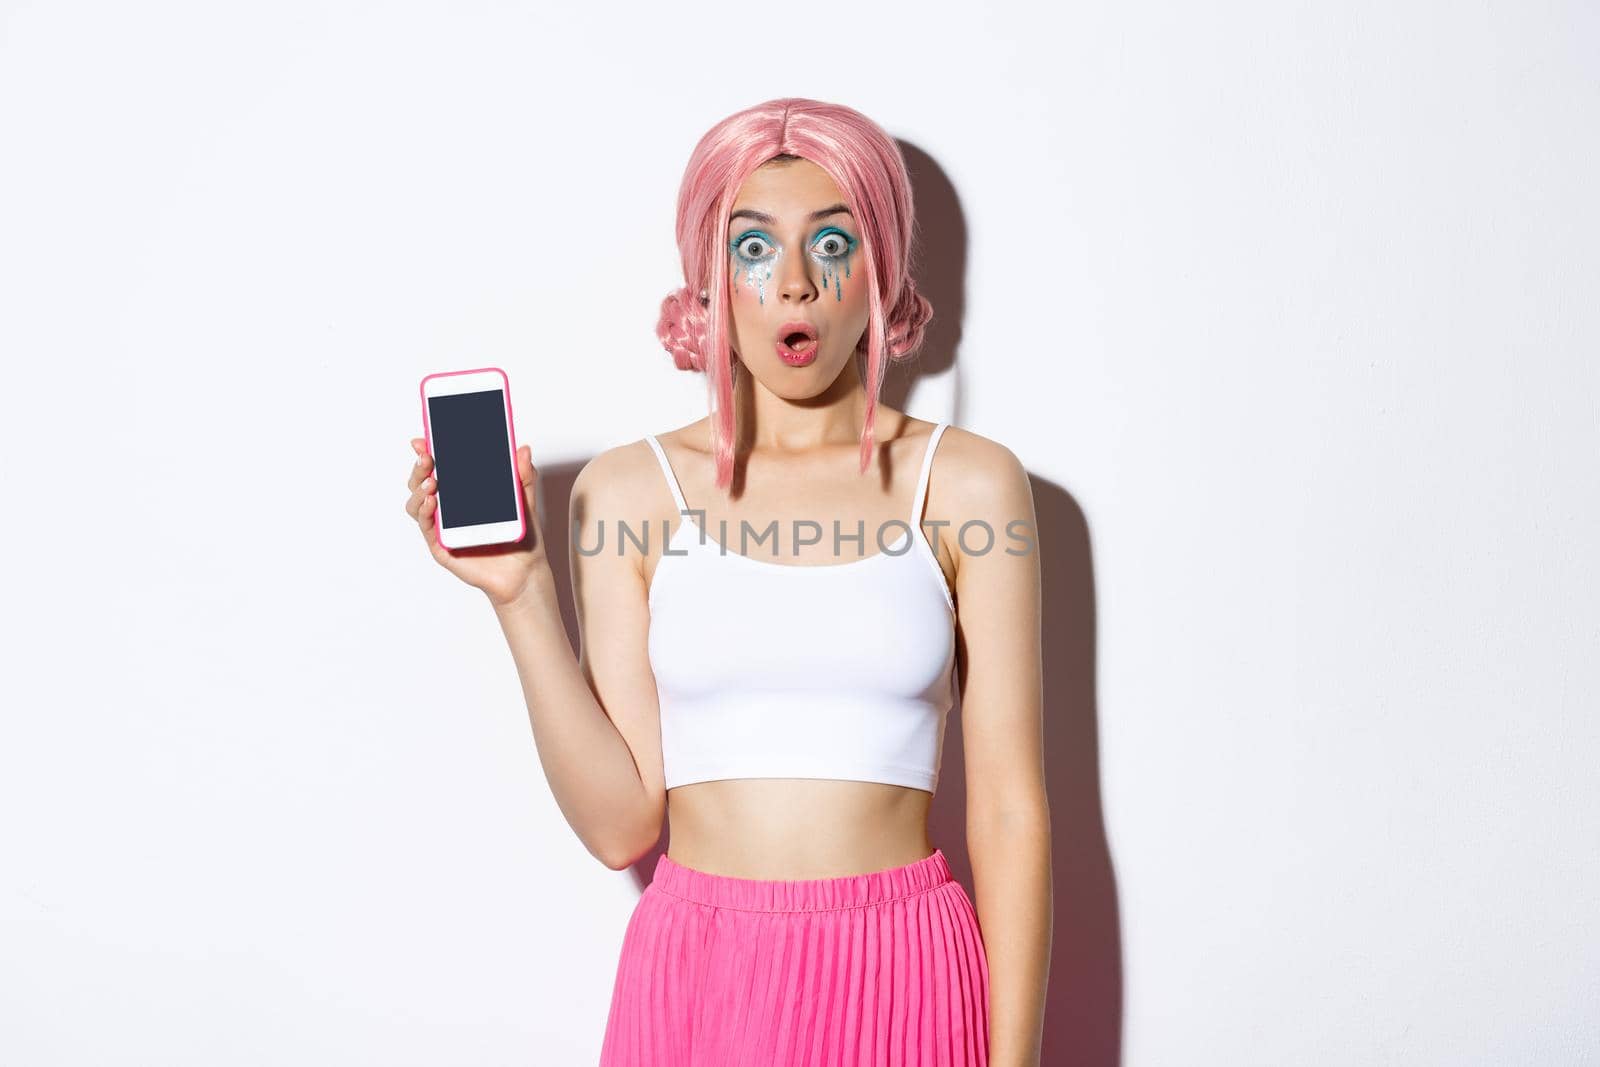 Image of surprised girl looking in awe while showing smartphone screen, dressed in pink wig and party outfit, standing over white background.